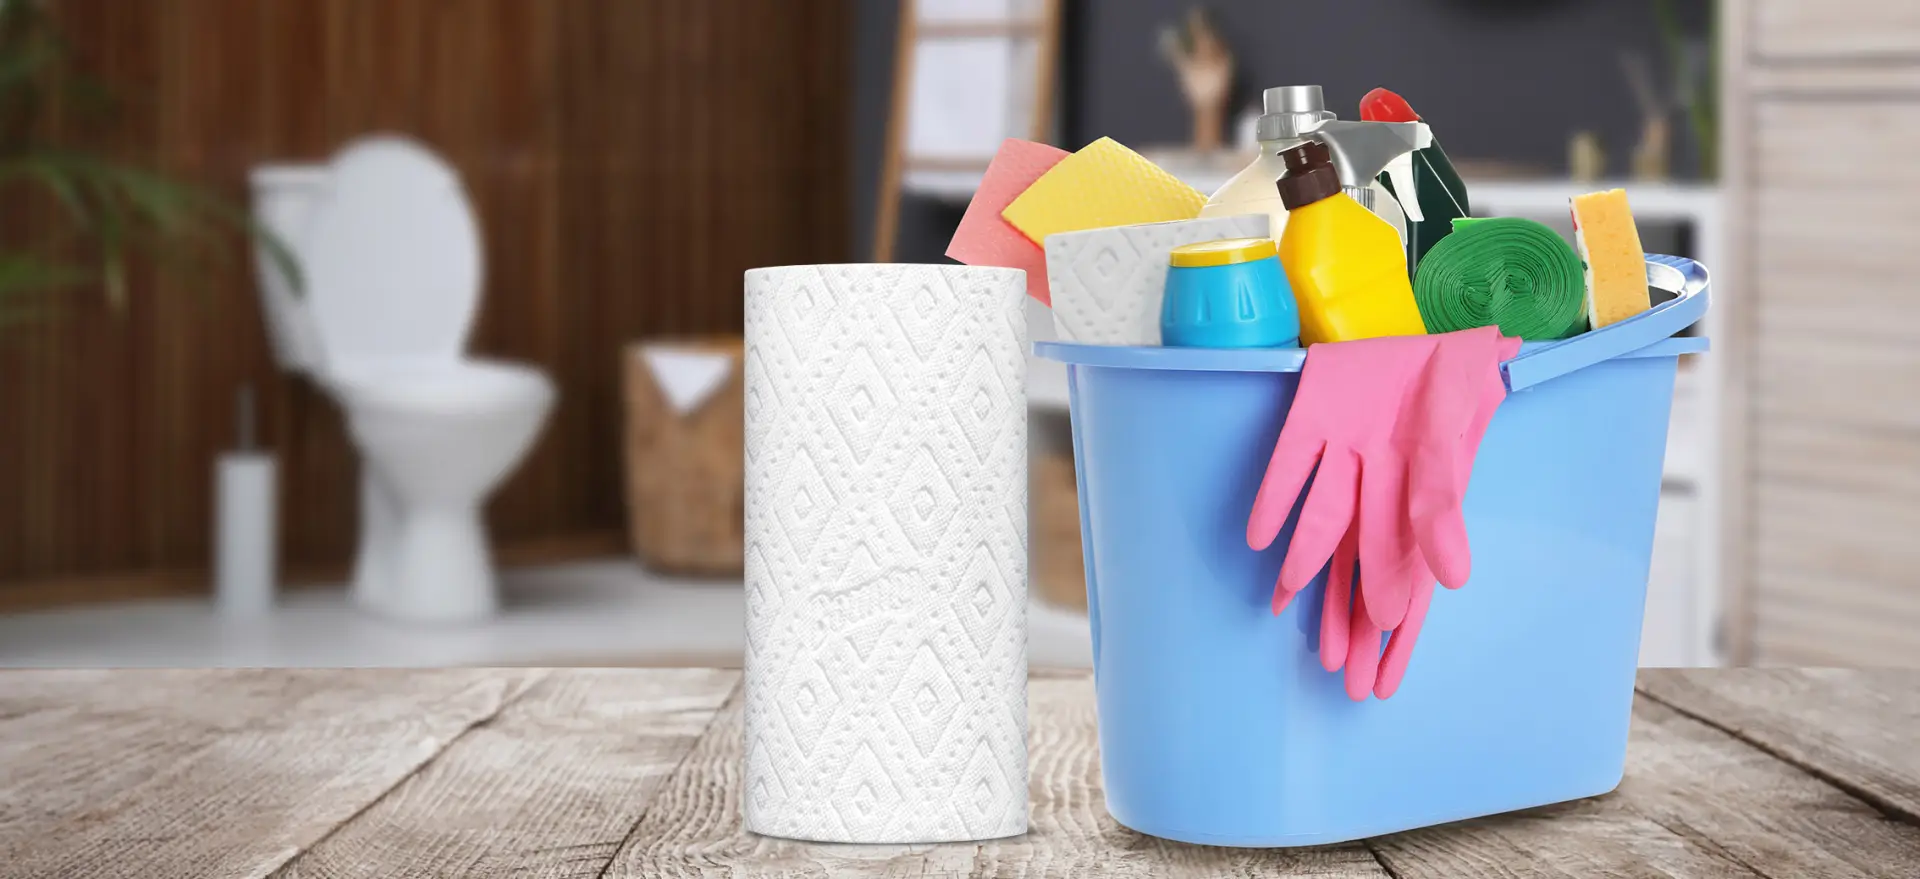 A blue bucket filled with cleaning supplies next to a Bounty paper towel roll